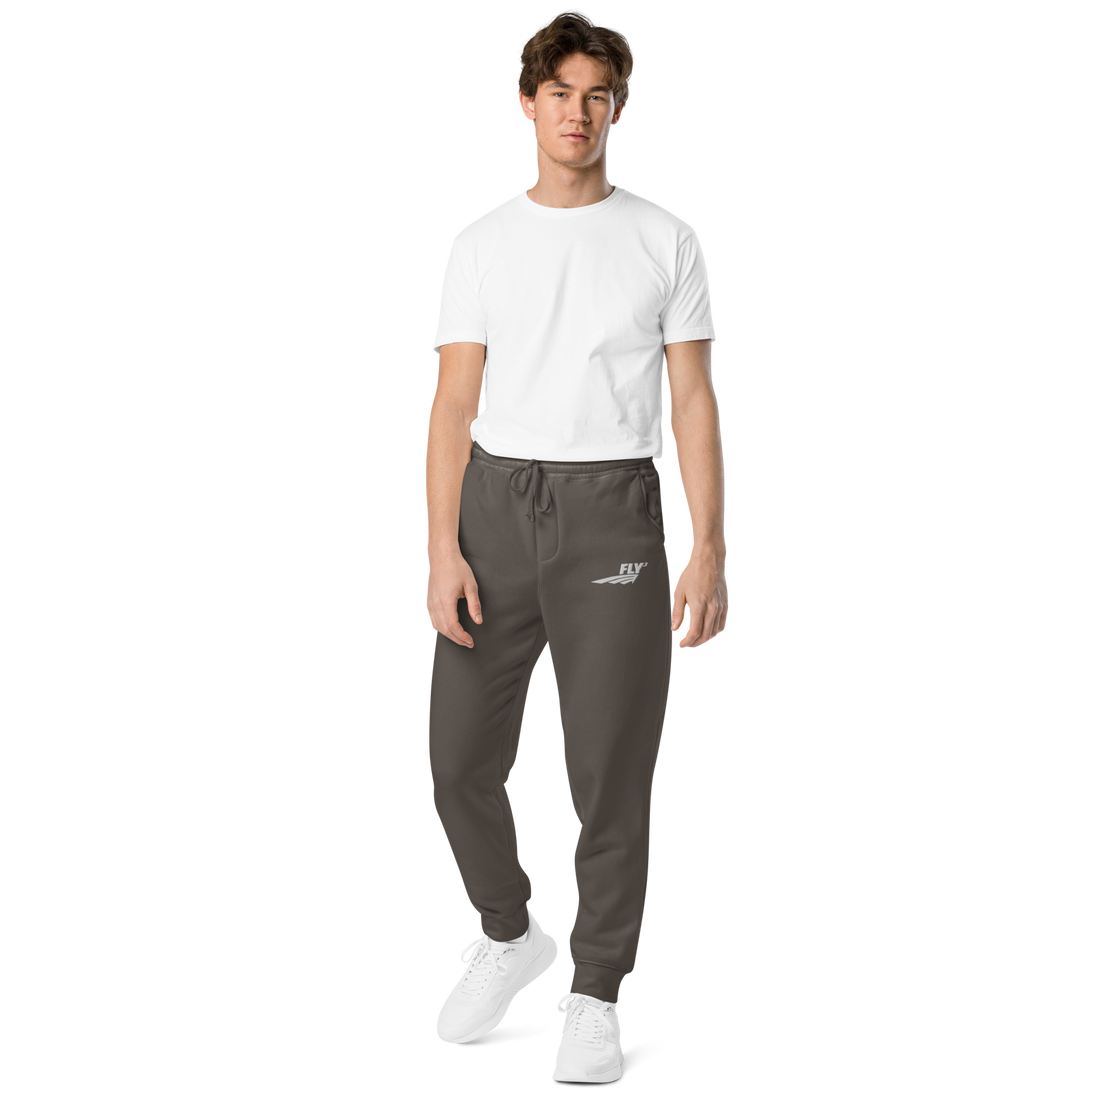 FLY³ pigment-dyed sweatpants | Flycube